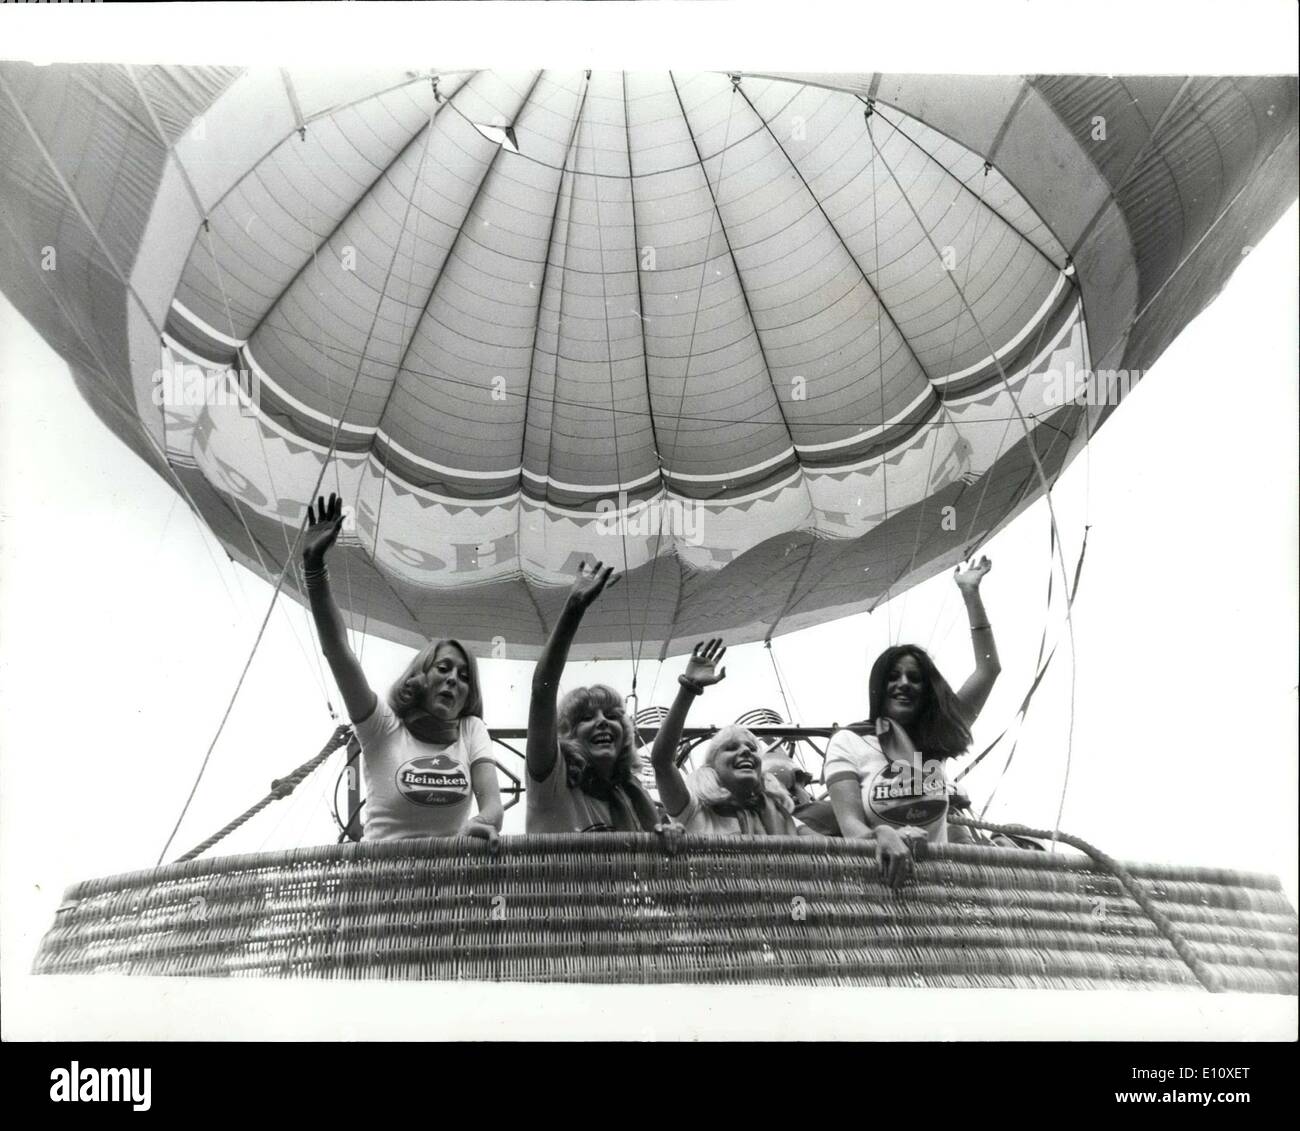 Aug. 06, 1974 - Hot-Beer Balloon: This Heineken Larger's air balloon which is believed to be the biggest in the world, was inflated yesterday at Coram Fields. Bloomsbury, London. It can carry up to 30 people. Photo shows Some the Heineken Girls in the barsket of the balloon after it had been inflated 1 at night. Stock Photo